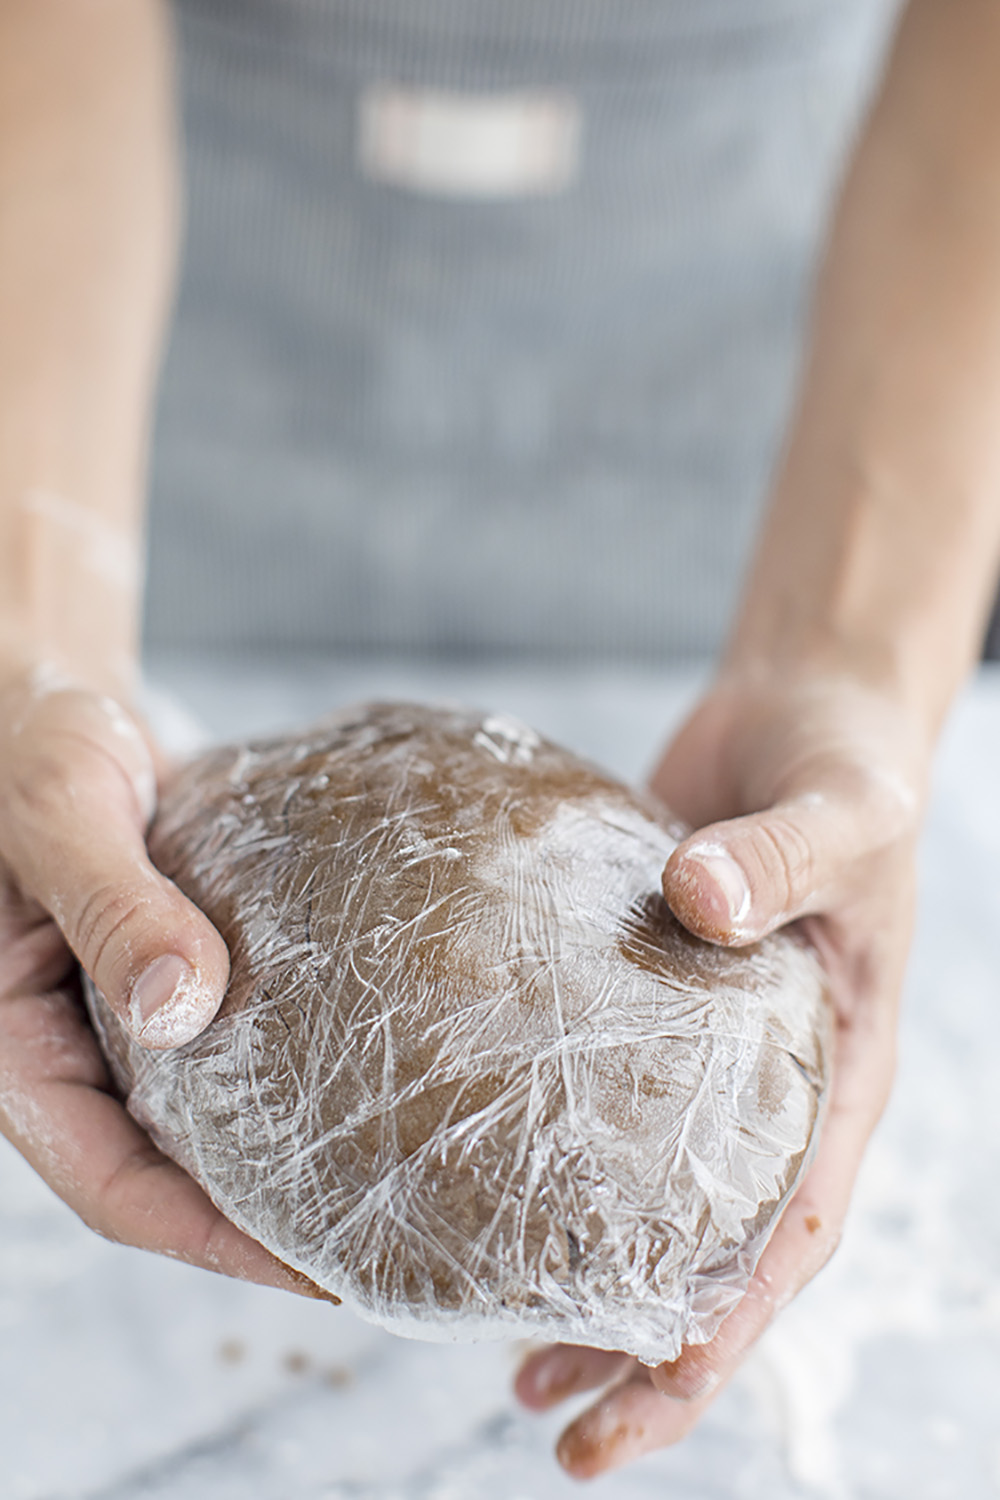 A person holding gingerbread cookie dough wrapped in plastic wrap.